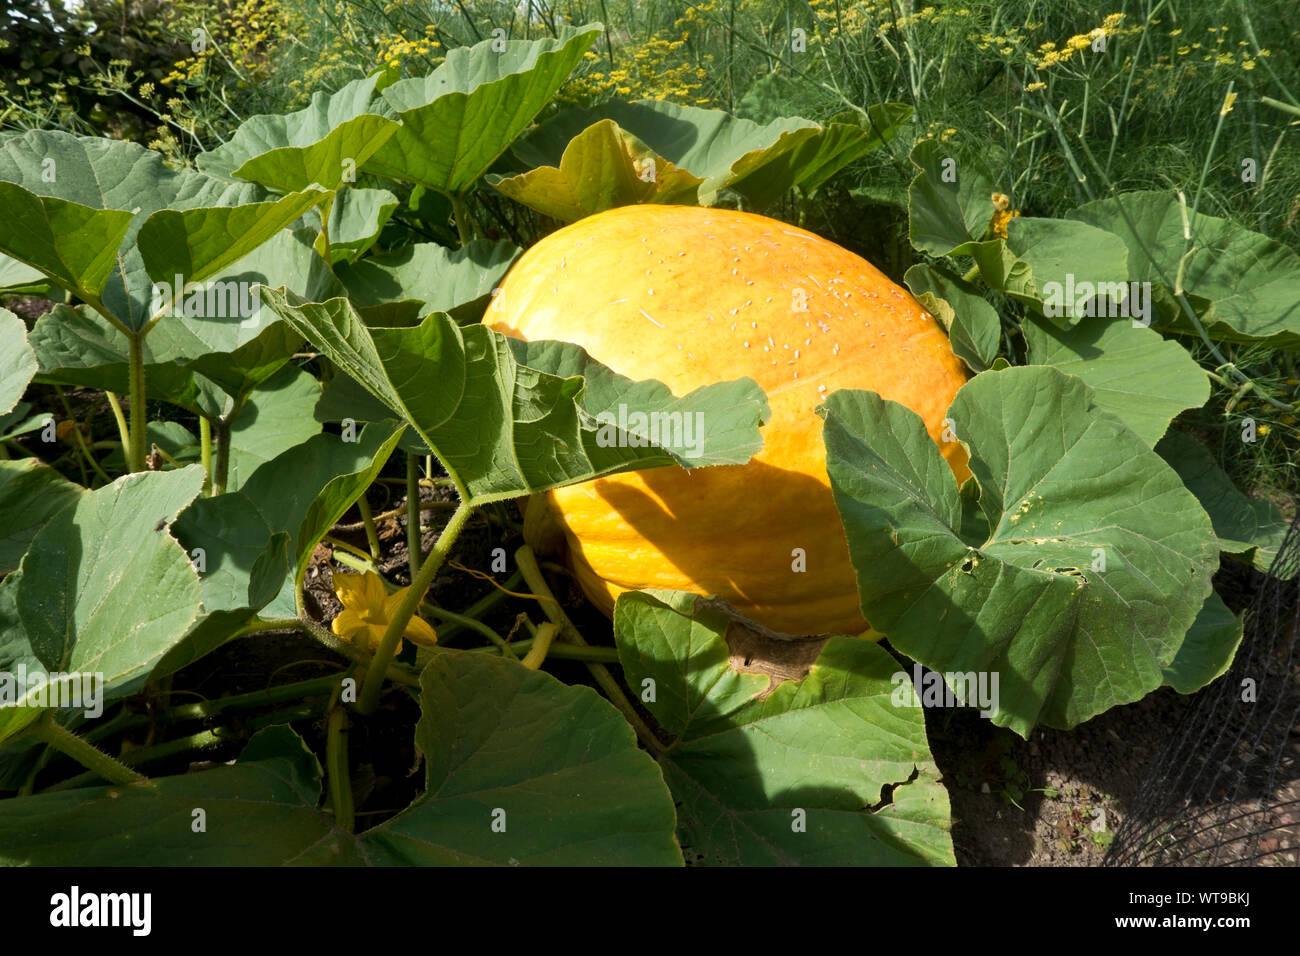 Close up of Pumpkin Atlantic giant variety plant growing in a garden in summer England UK United Kingdom GB Great Britain Stock Photo